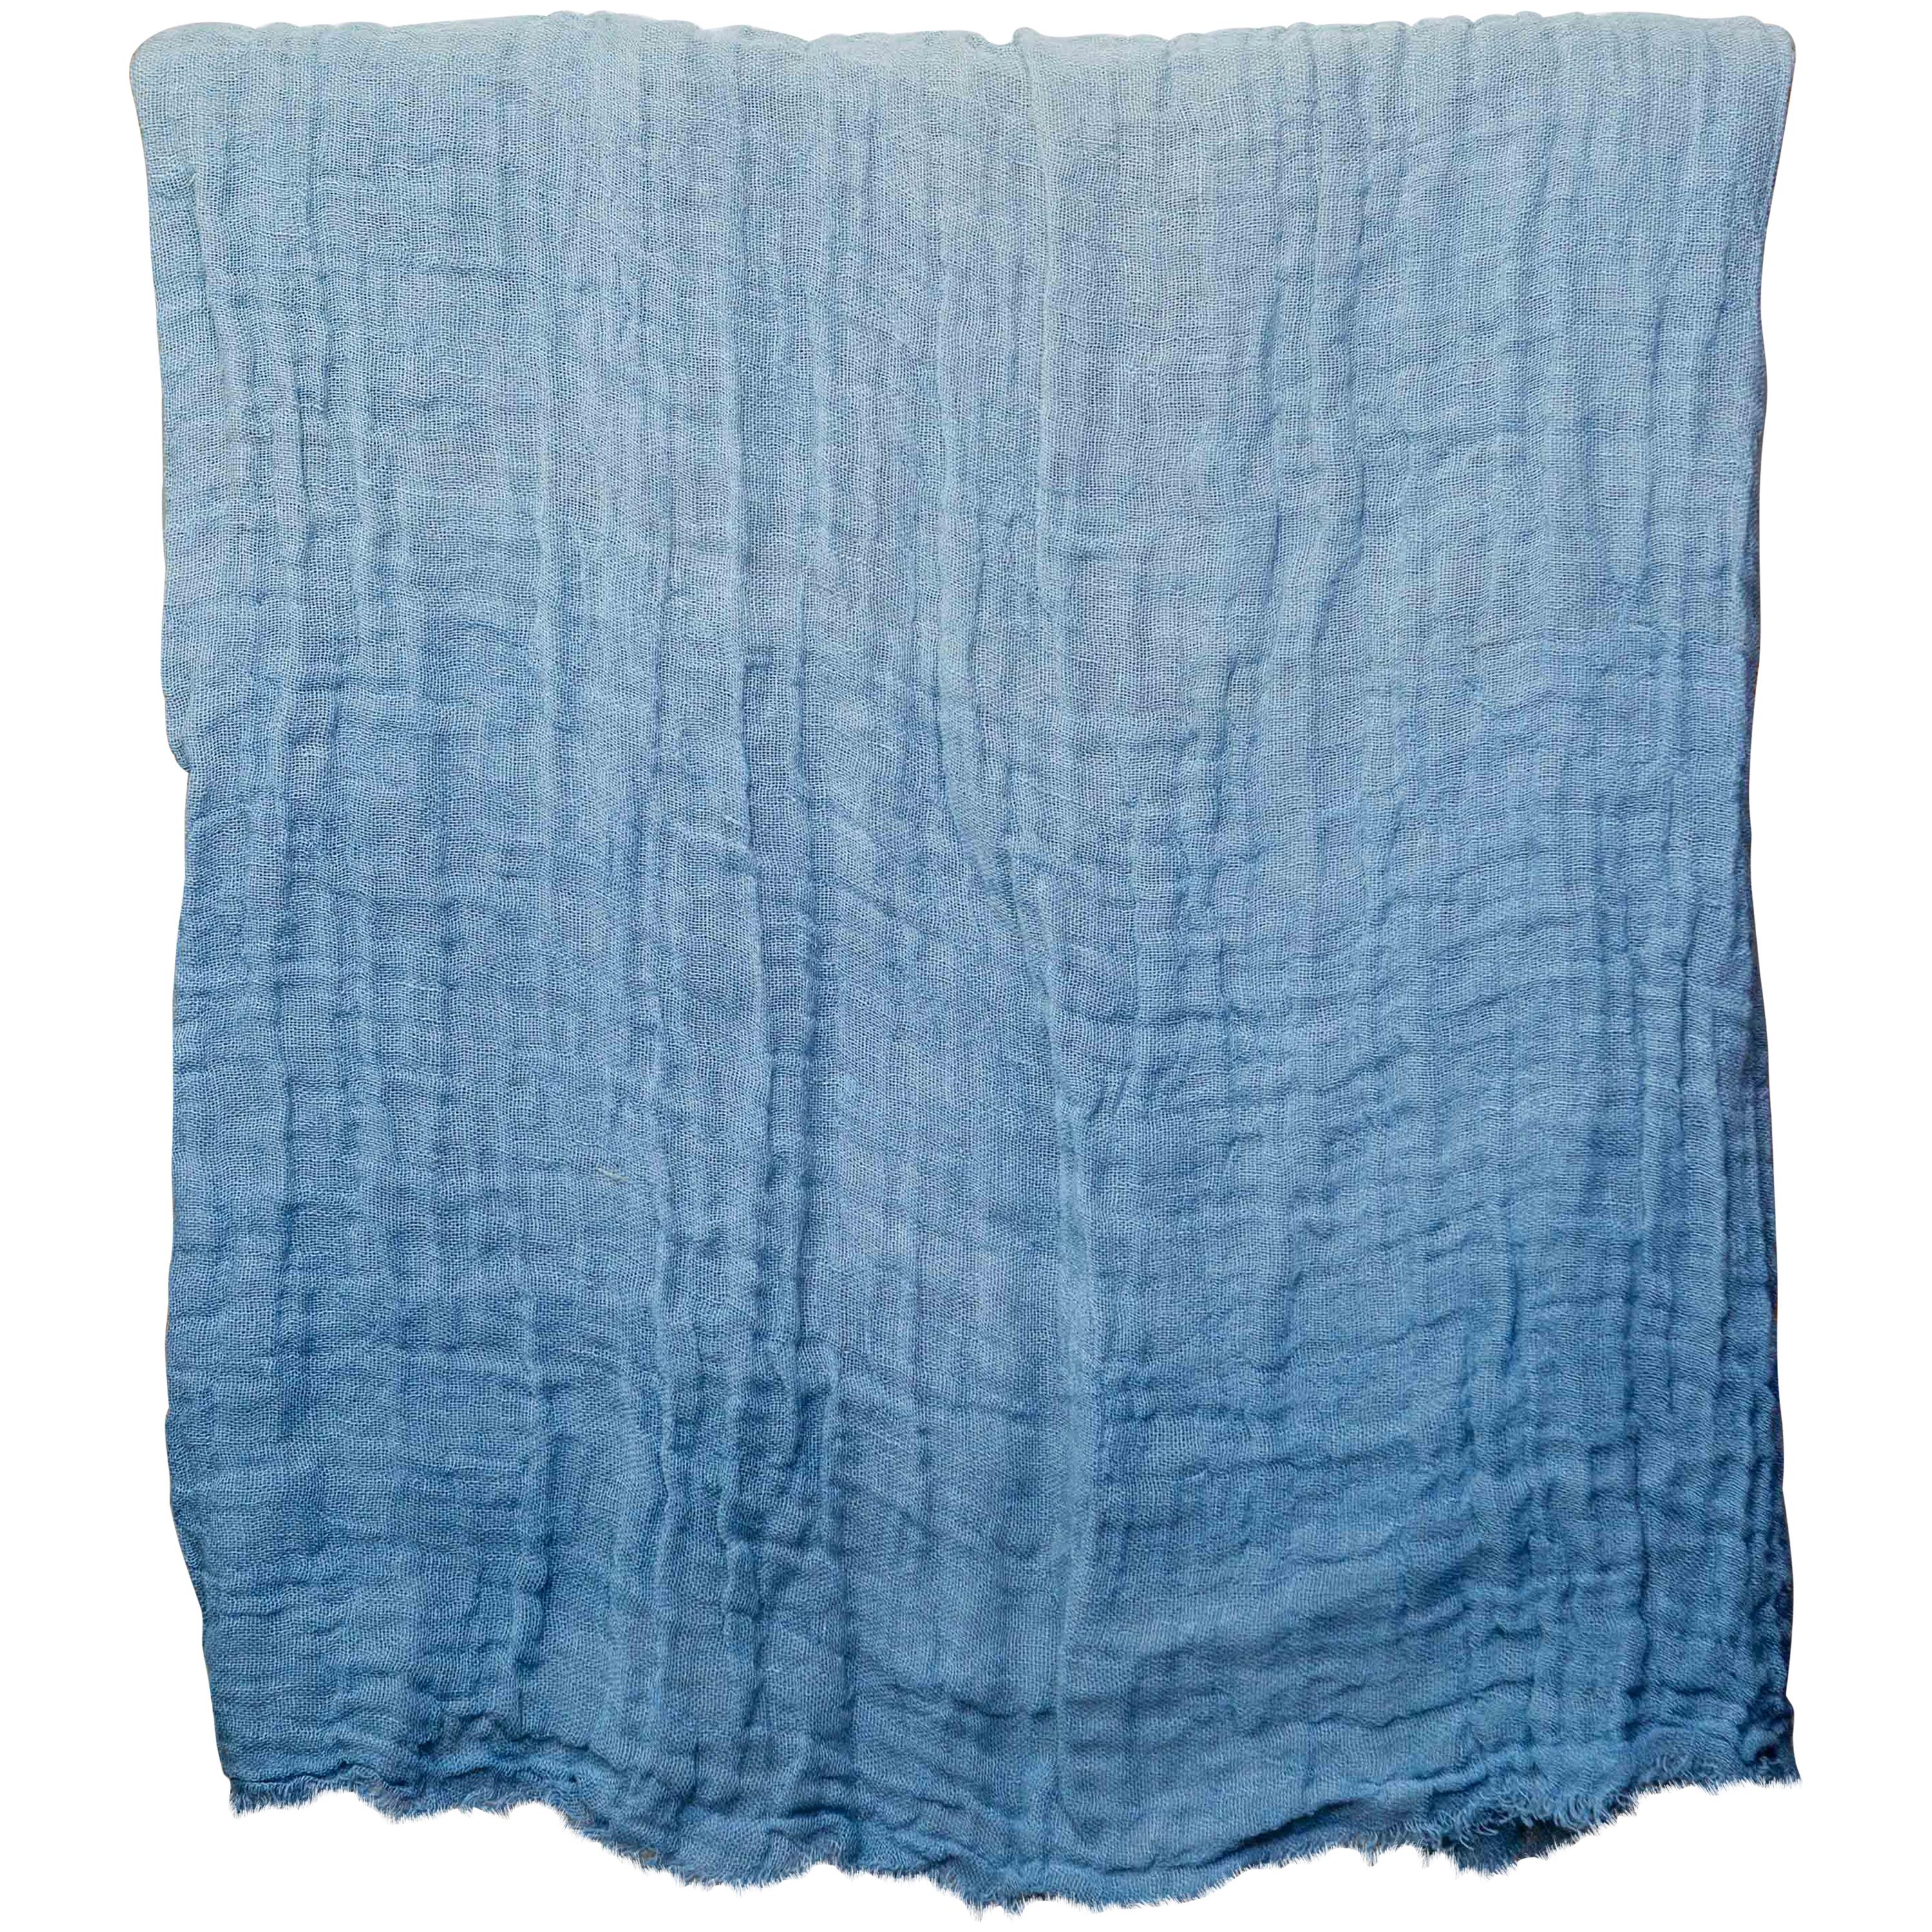 Hand Painted Open-Weave Linen Throw in Blue Tones, in Stock For Sale